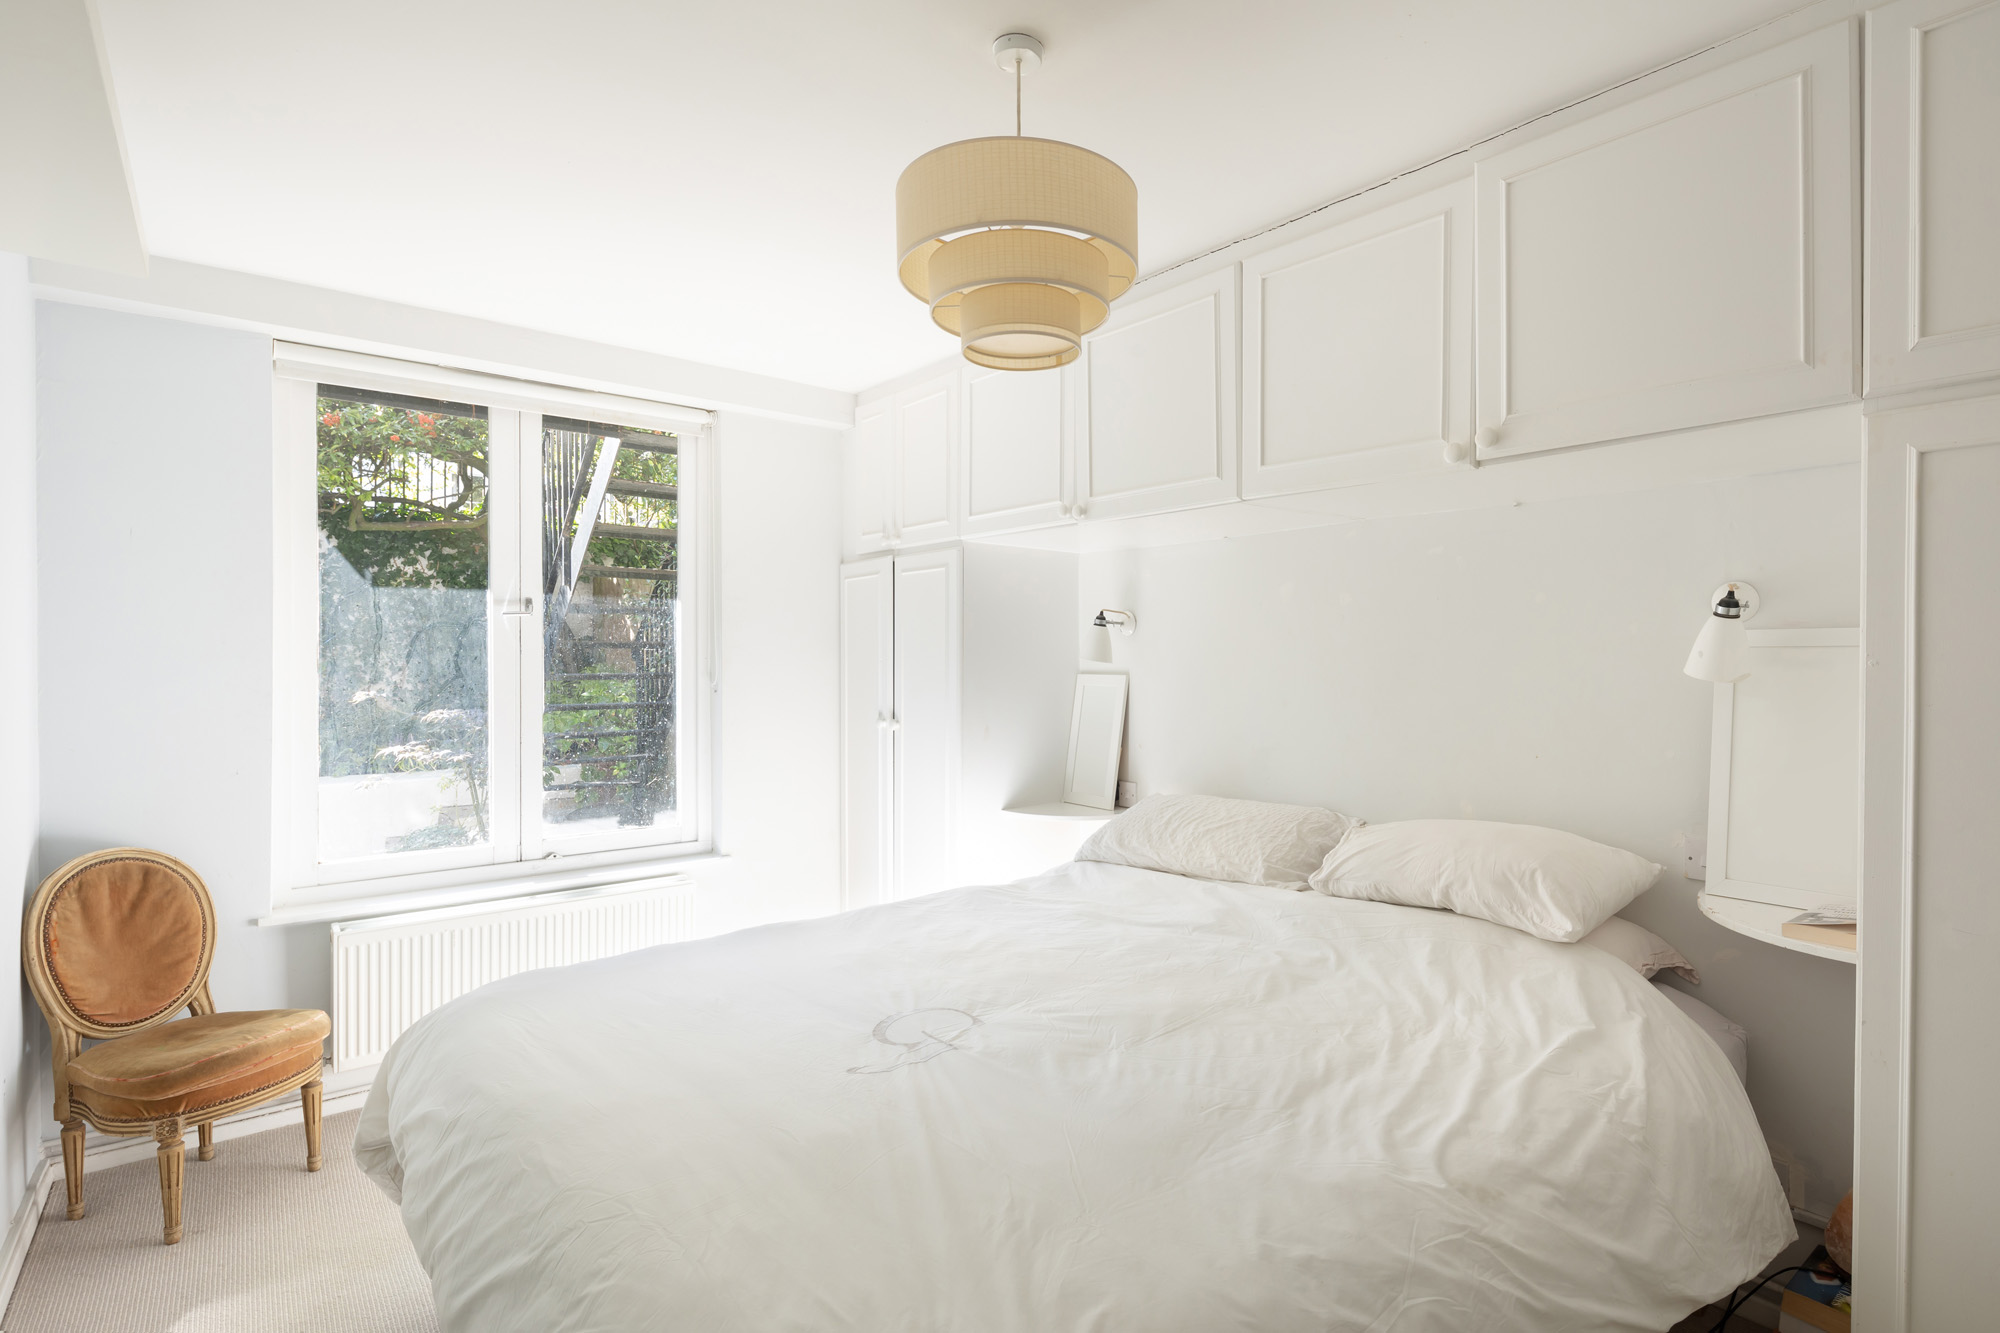 For Sale: Powis Square Notting Hill W11 minimalist master bedroom